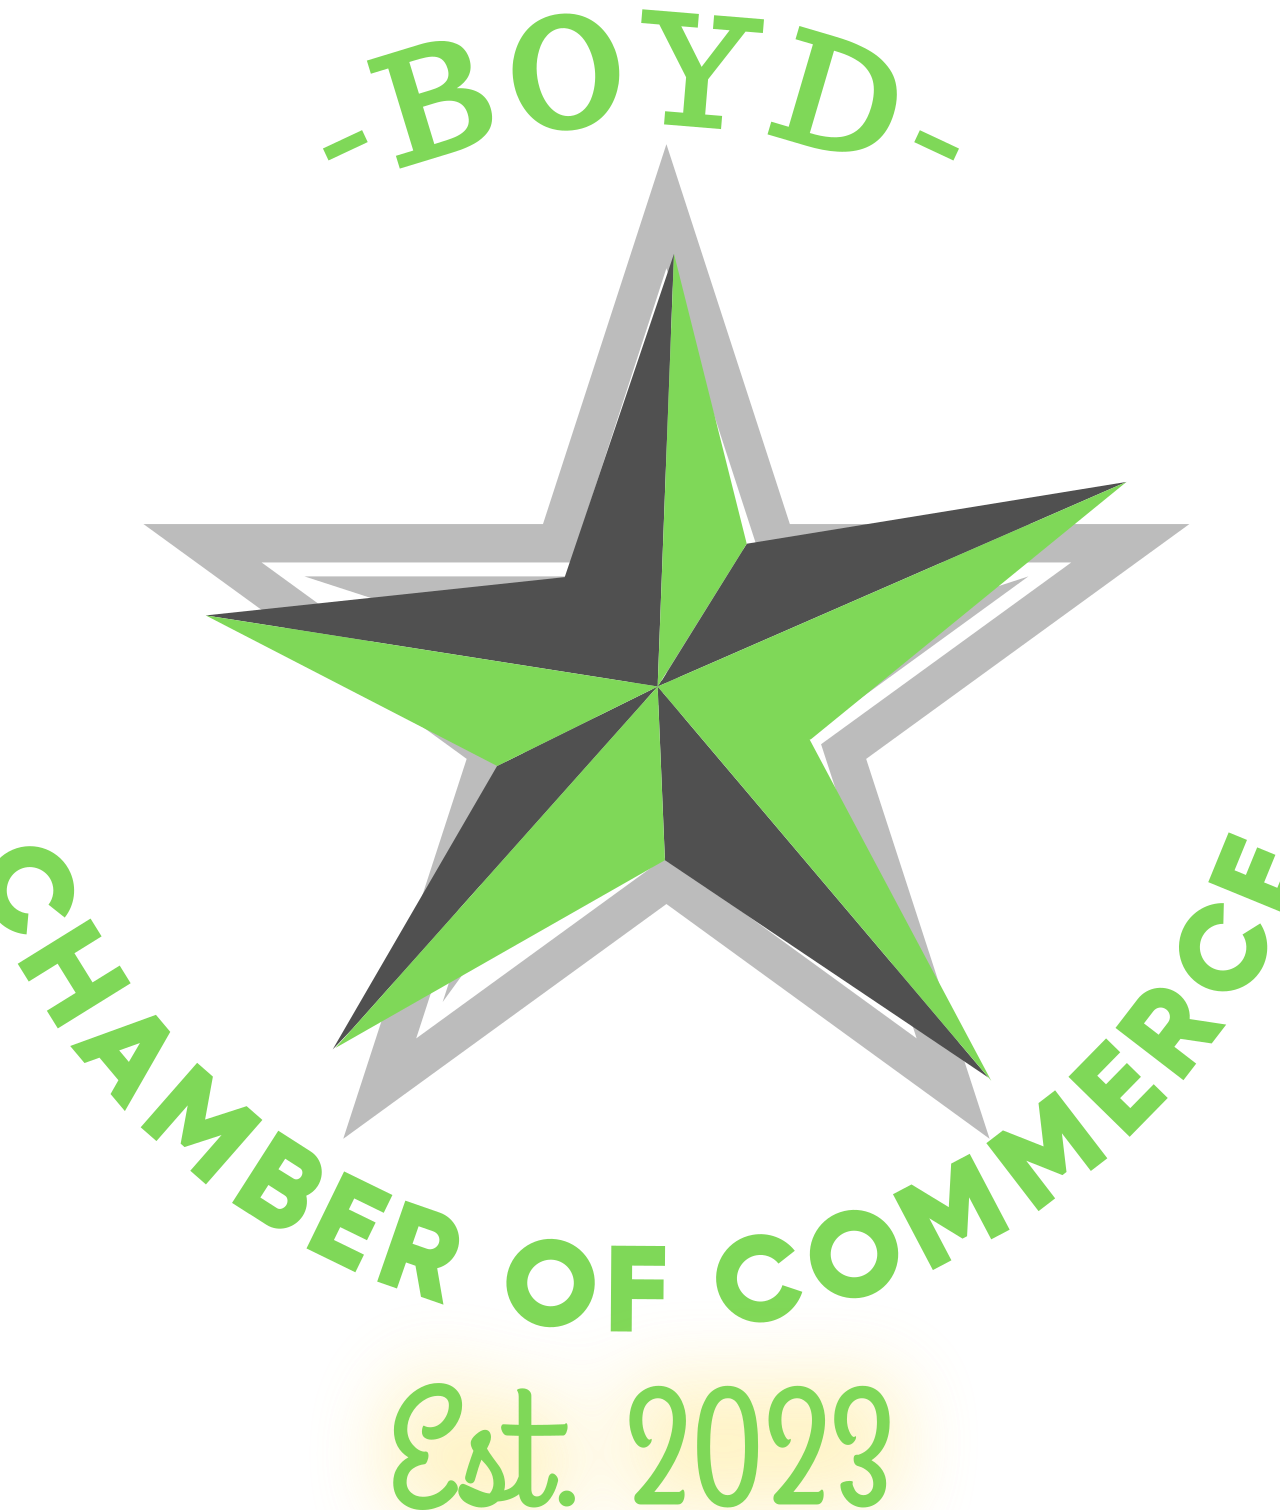 Chamber Of Commerce Boyd, Texas's web page